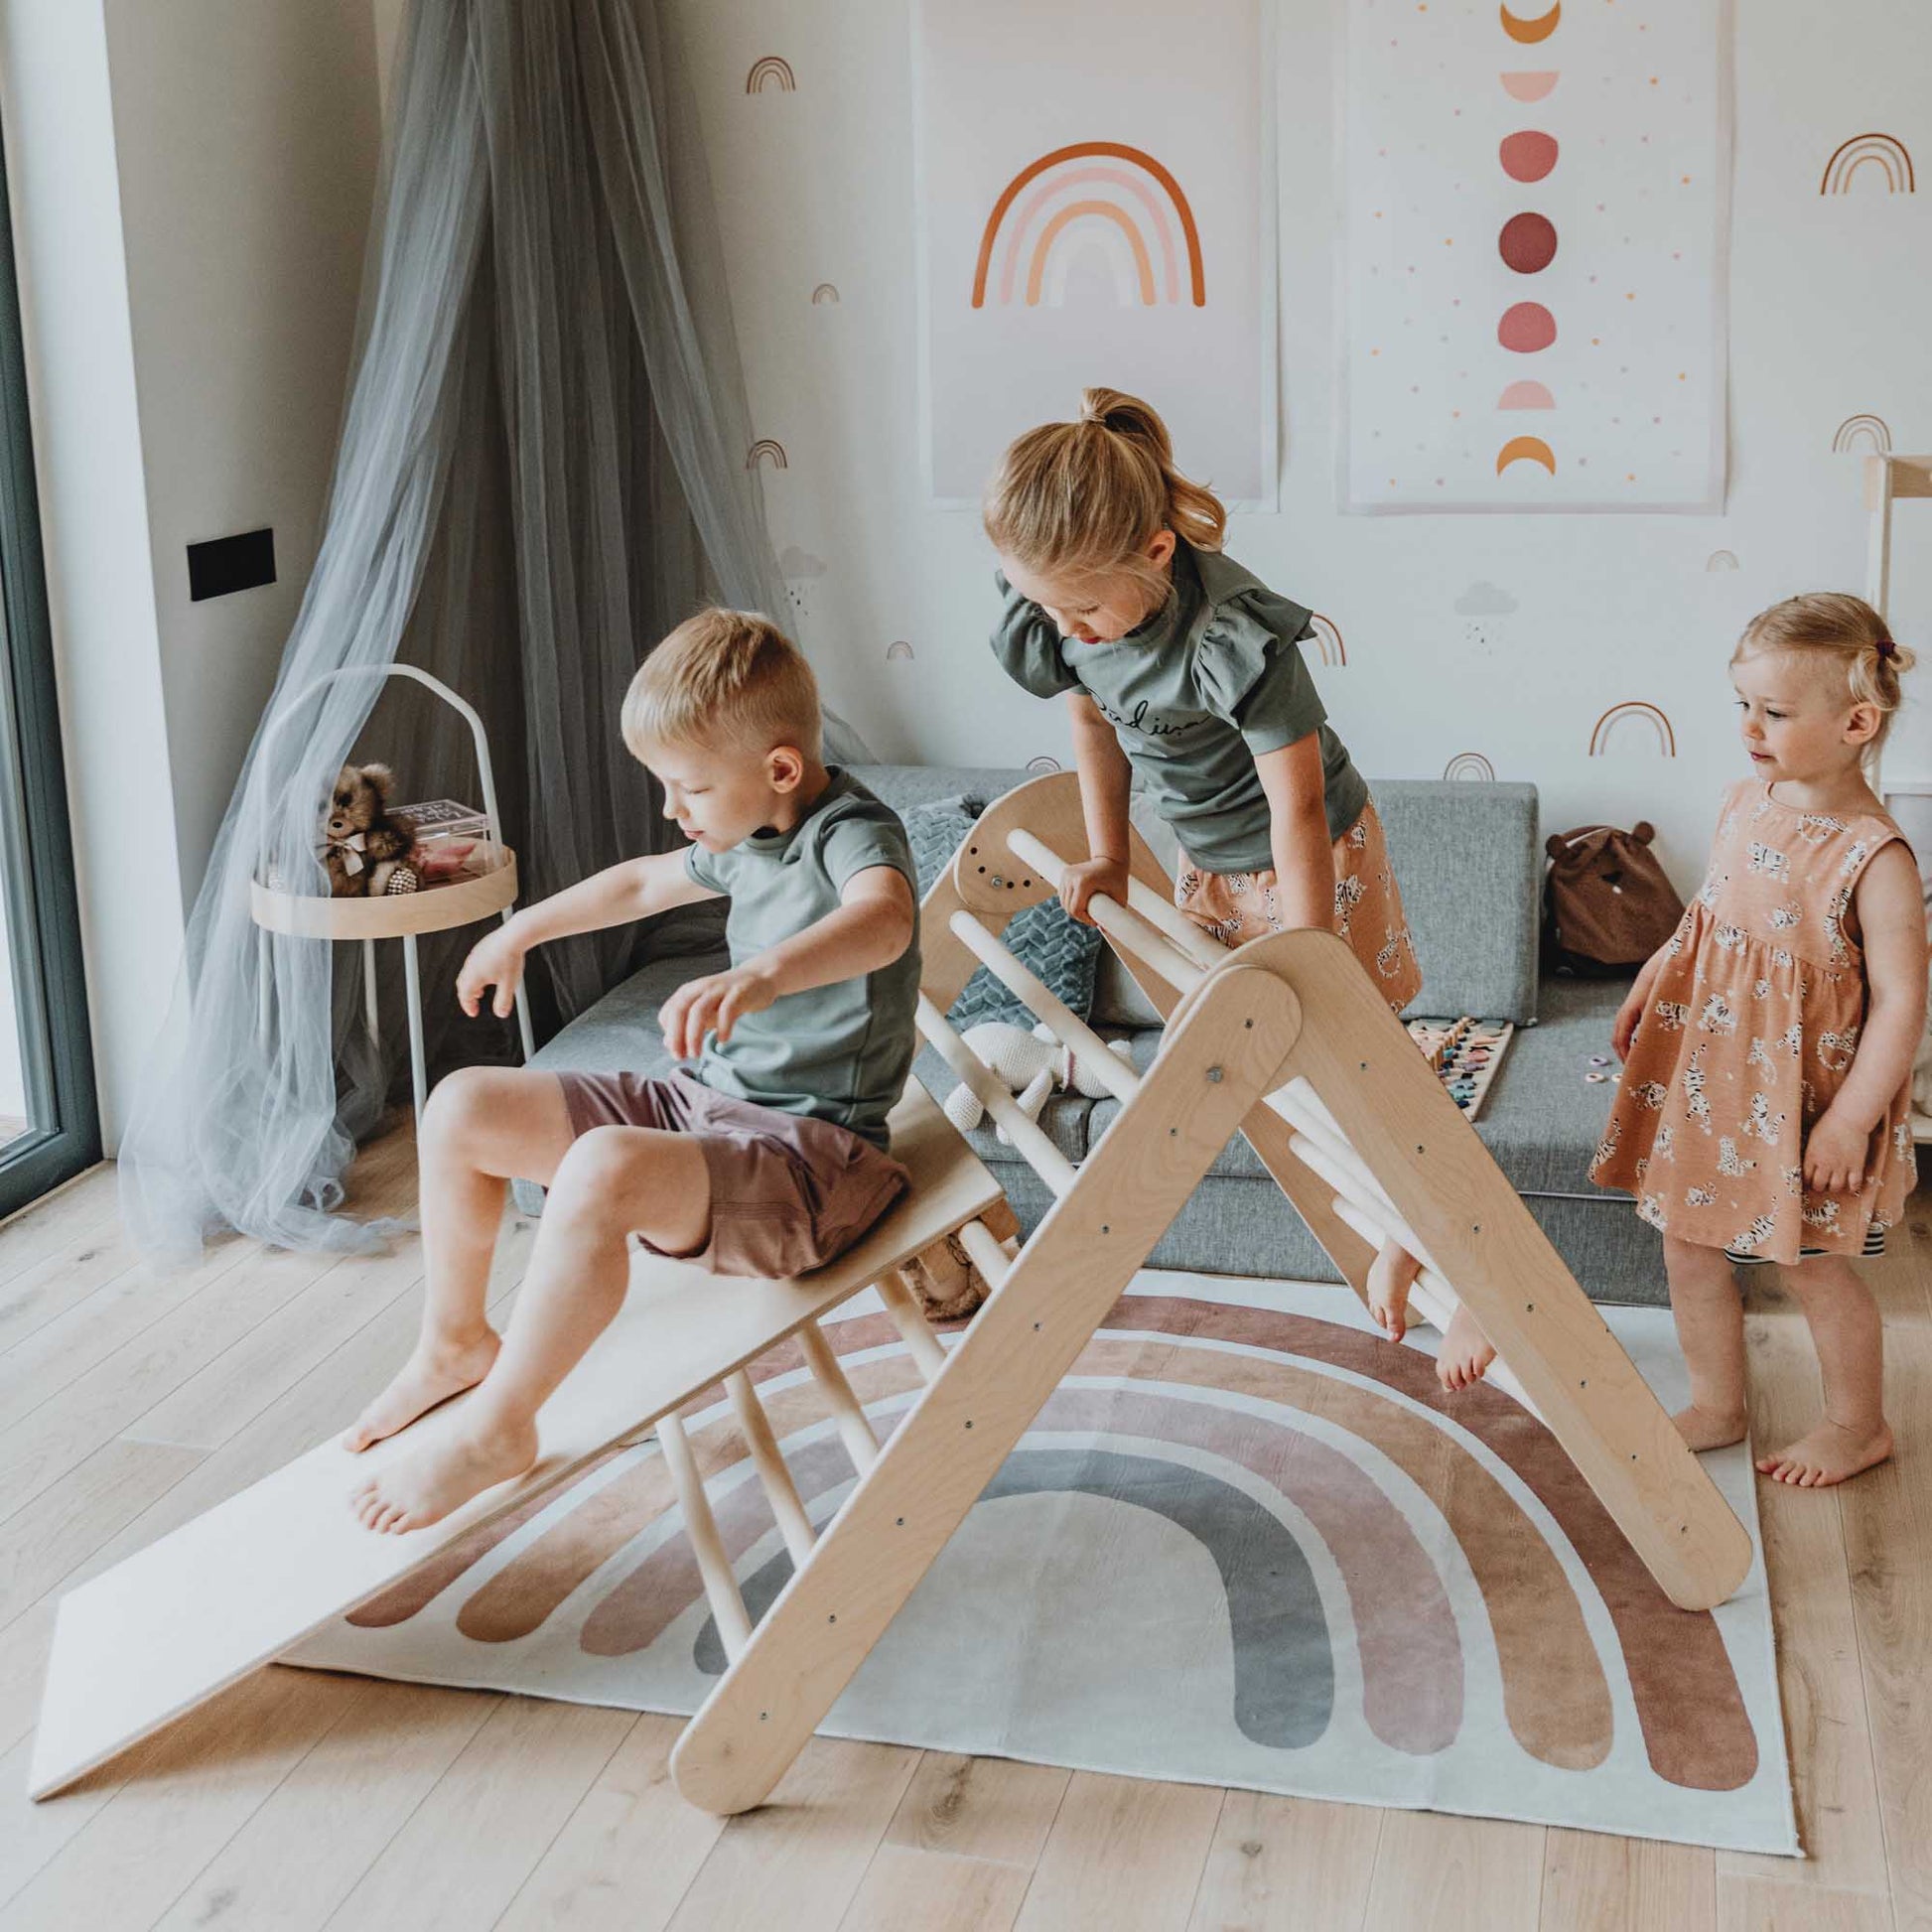 Three children practicing their motor skills on a Foldable climbing triangle with 2 slope levels in a living room.